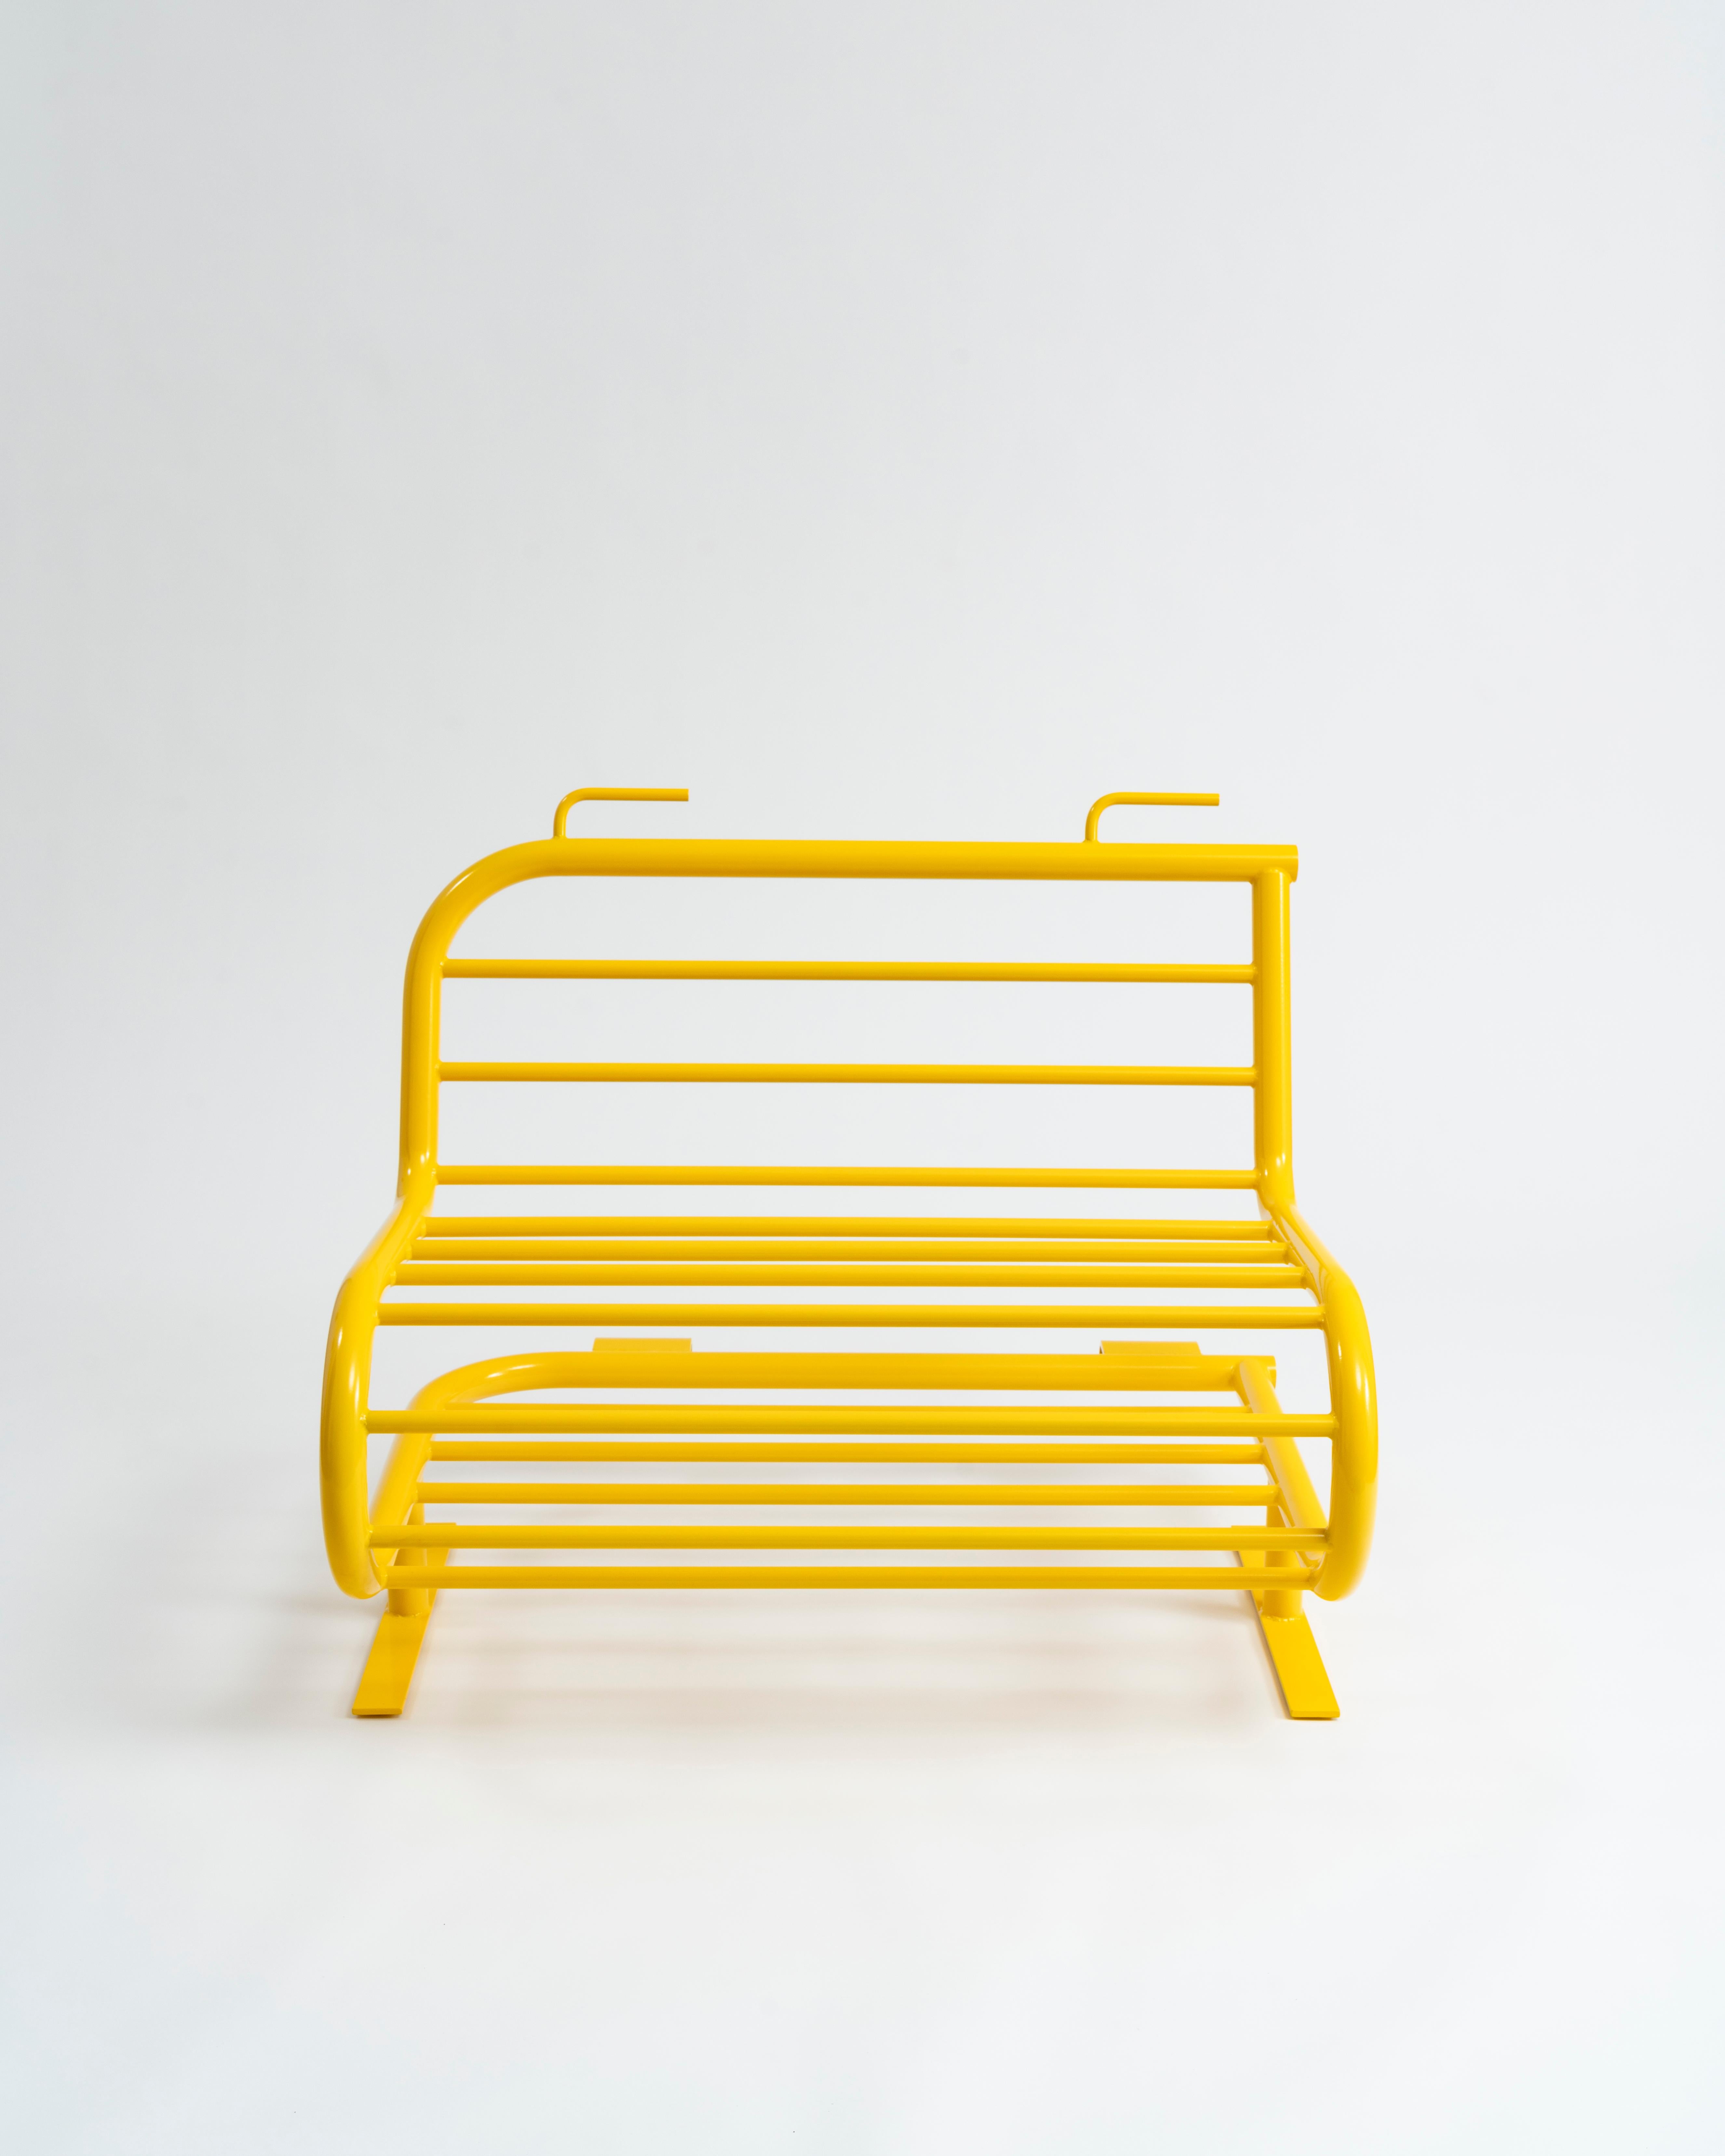 This vibrant sunshine yellow powder-coated tubular steel bench by New York-based design practice JUMBO NYC is an exceptionally durable two-seater bench made in the form of a metal fence panel, or police barricade, that has been contorted into a the